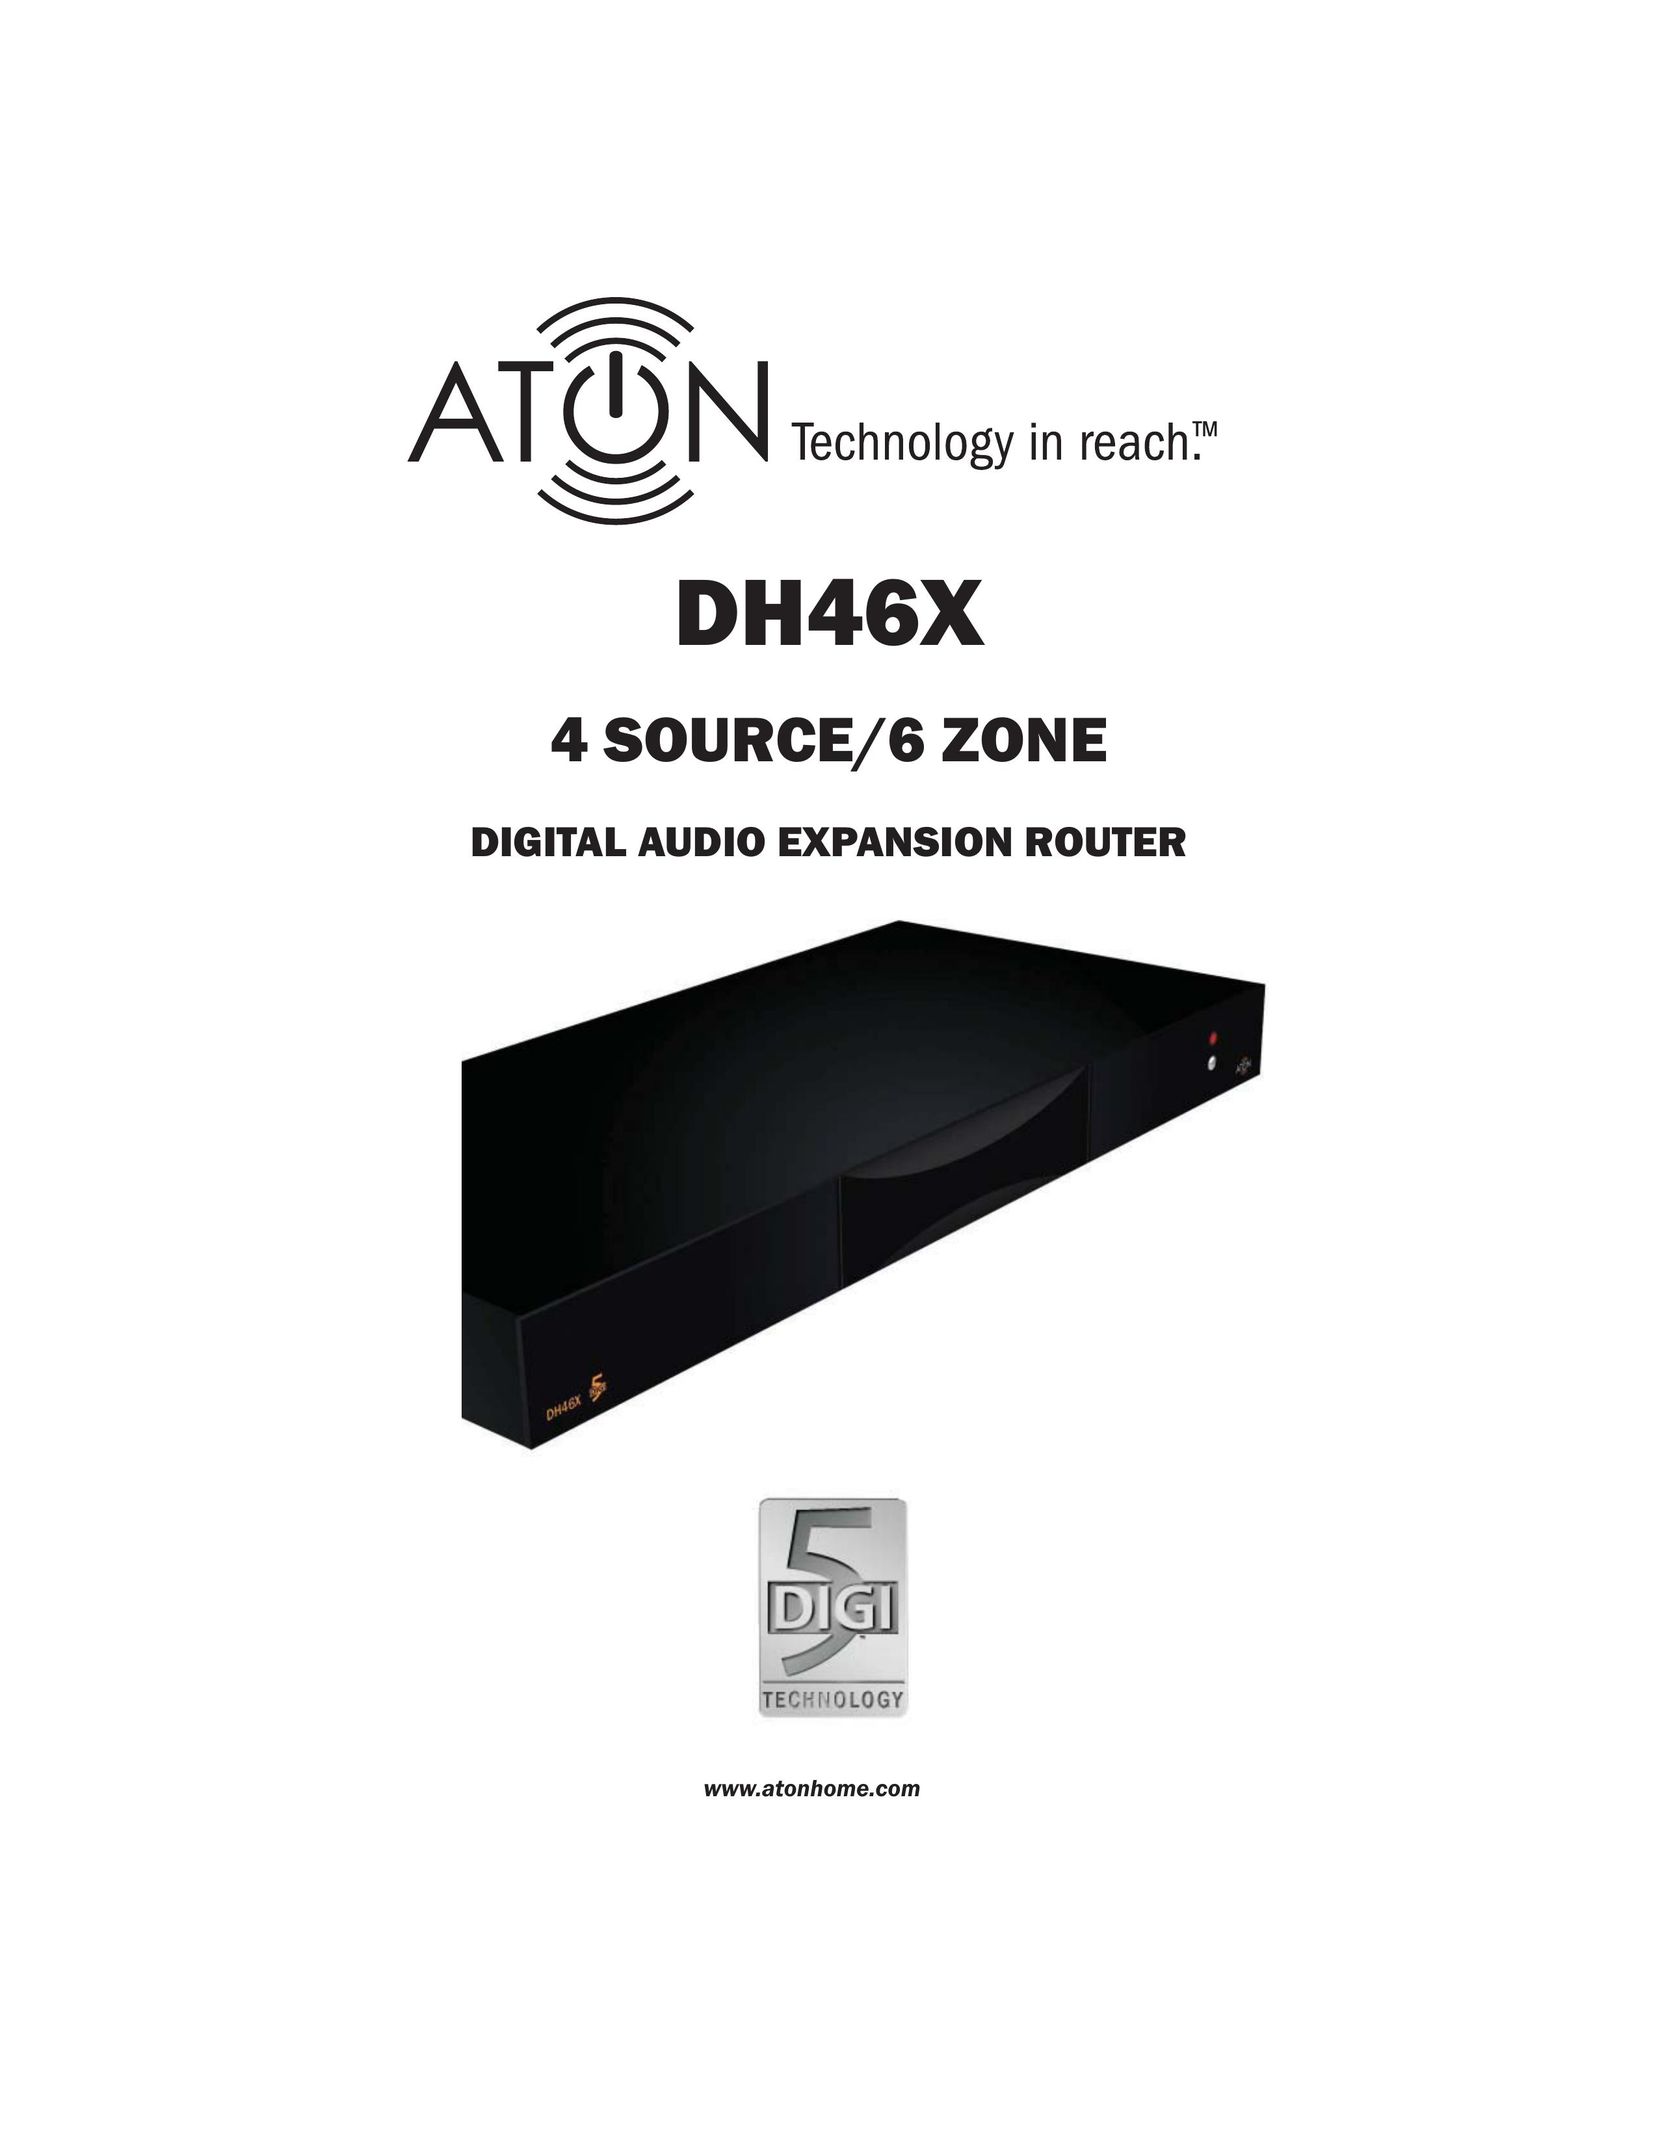 ATON DH46X Network Router User Manual